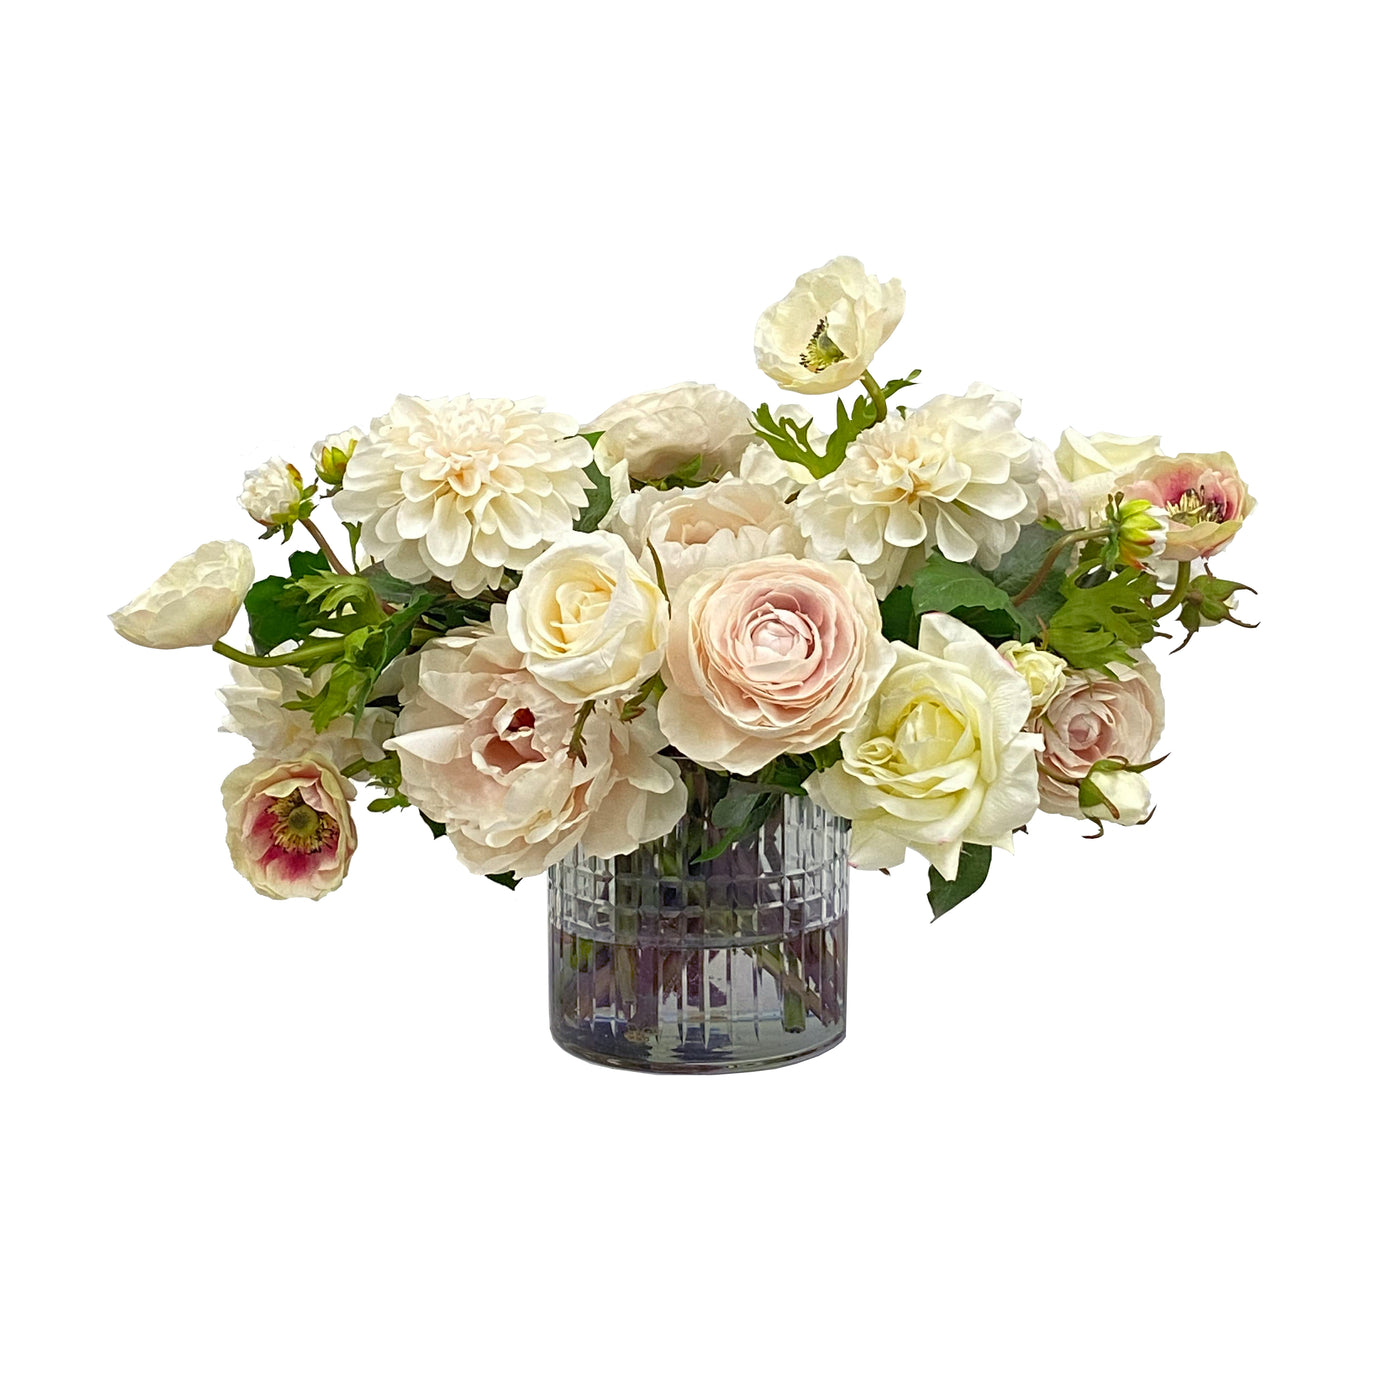 A natural looking cream colored faux rose and ranunculus tabletop arrangement in clear cut glass vase